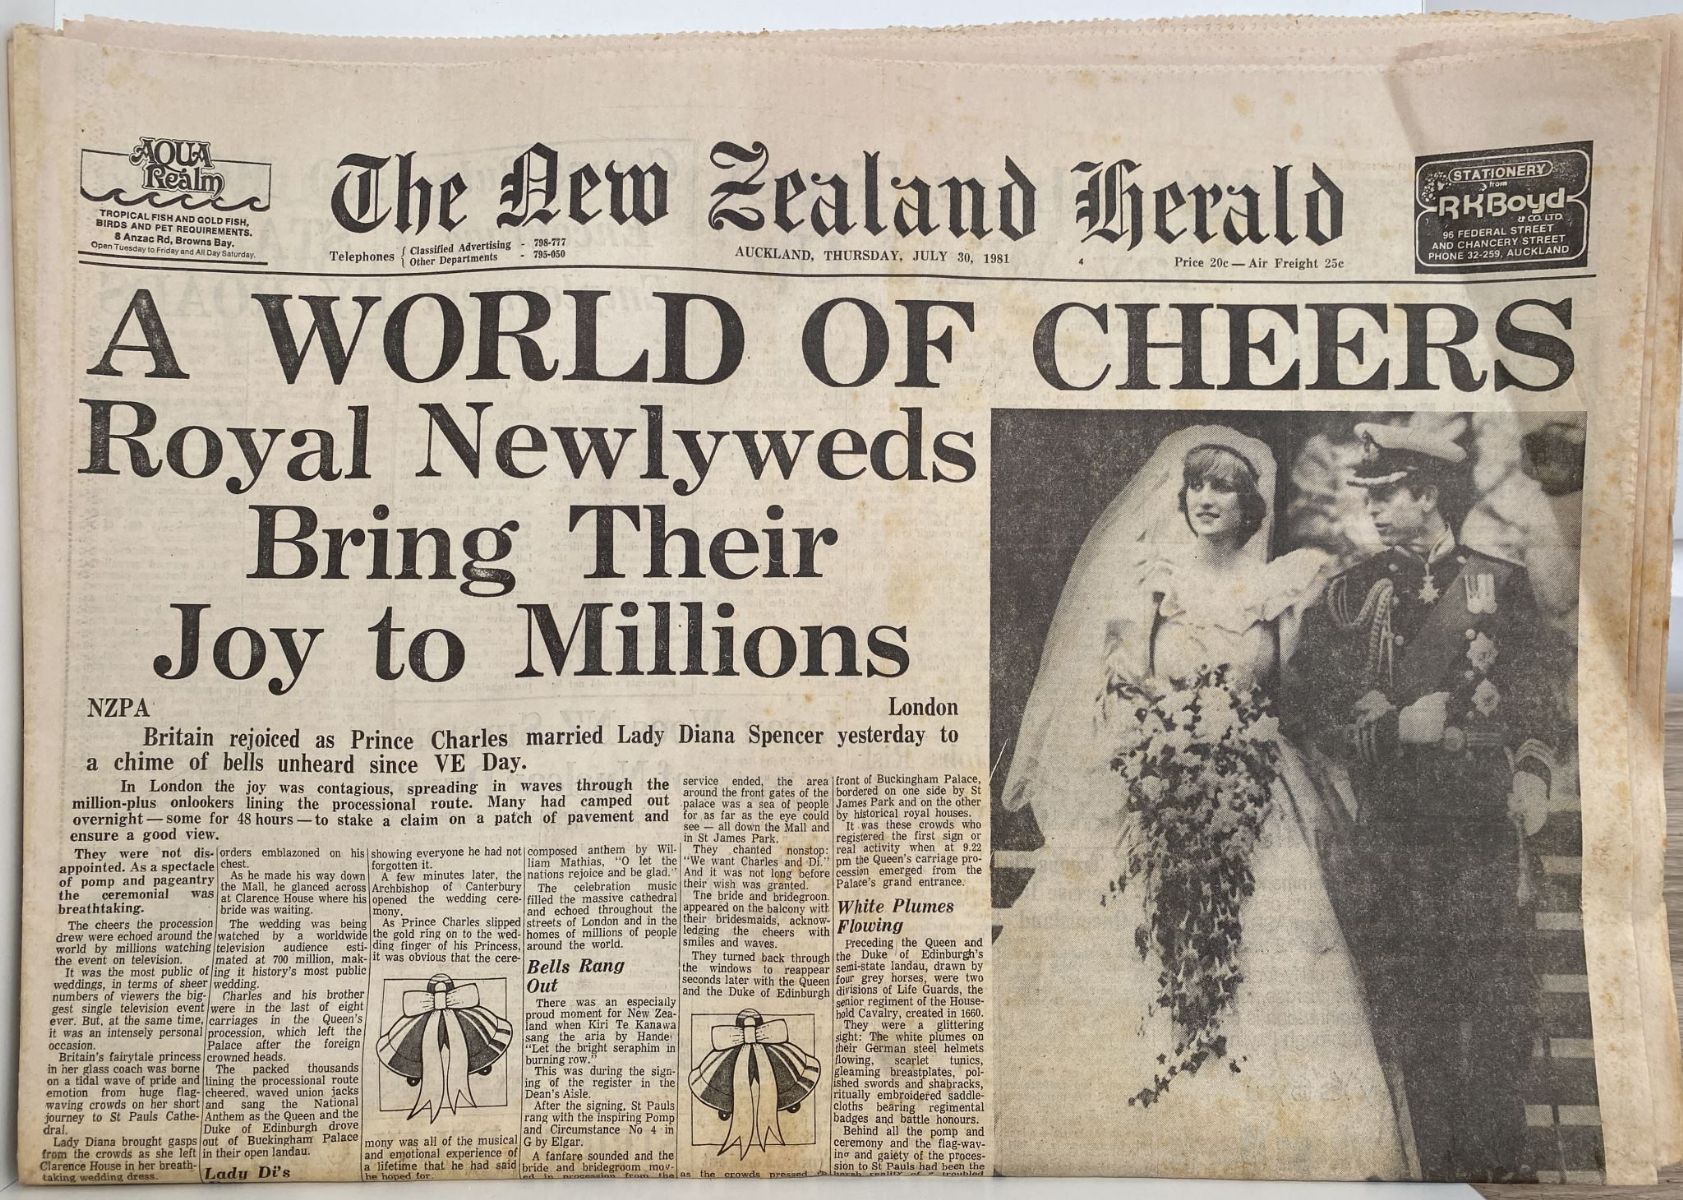 OLD NEWSPAPER: The New Zealand Herald, 30th July 1981 - Royal wedding